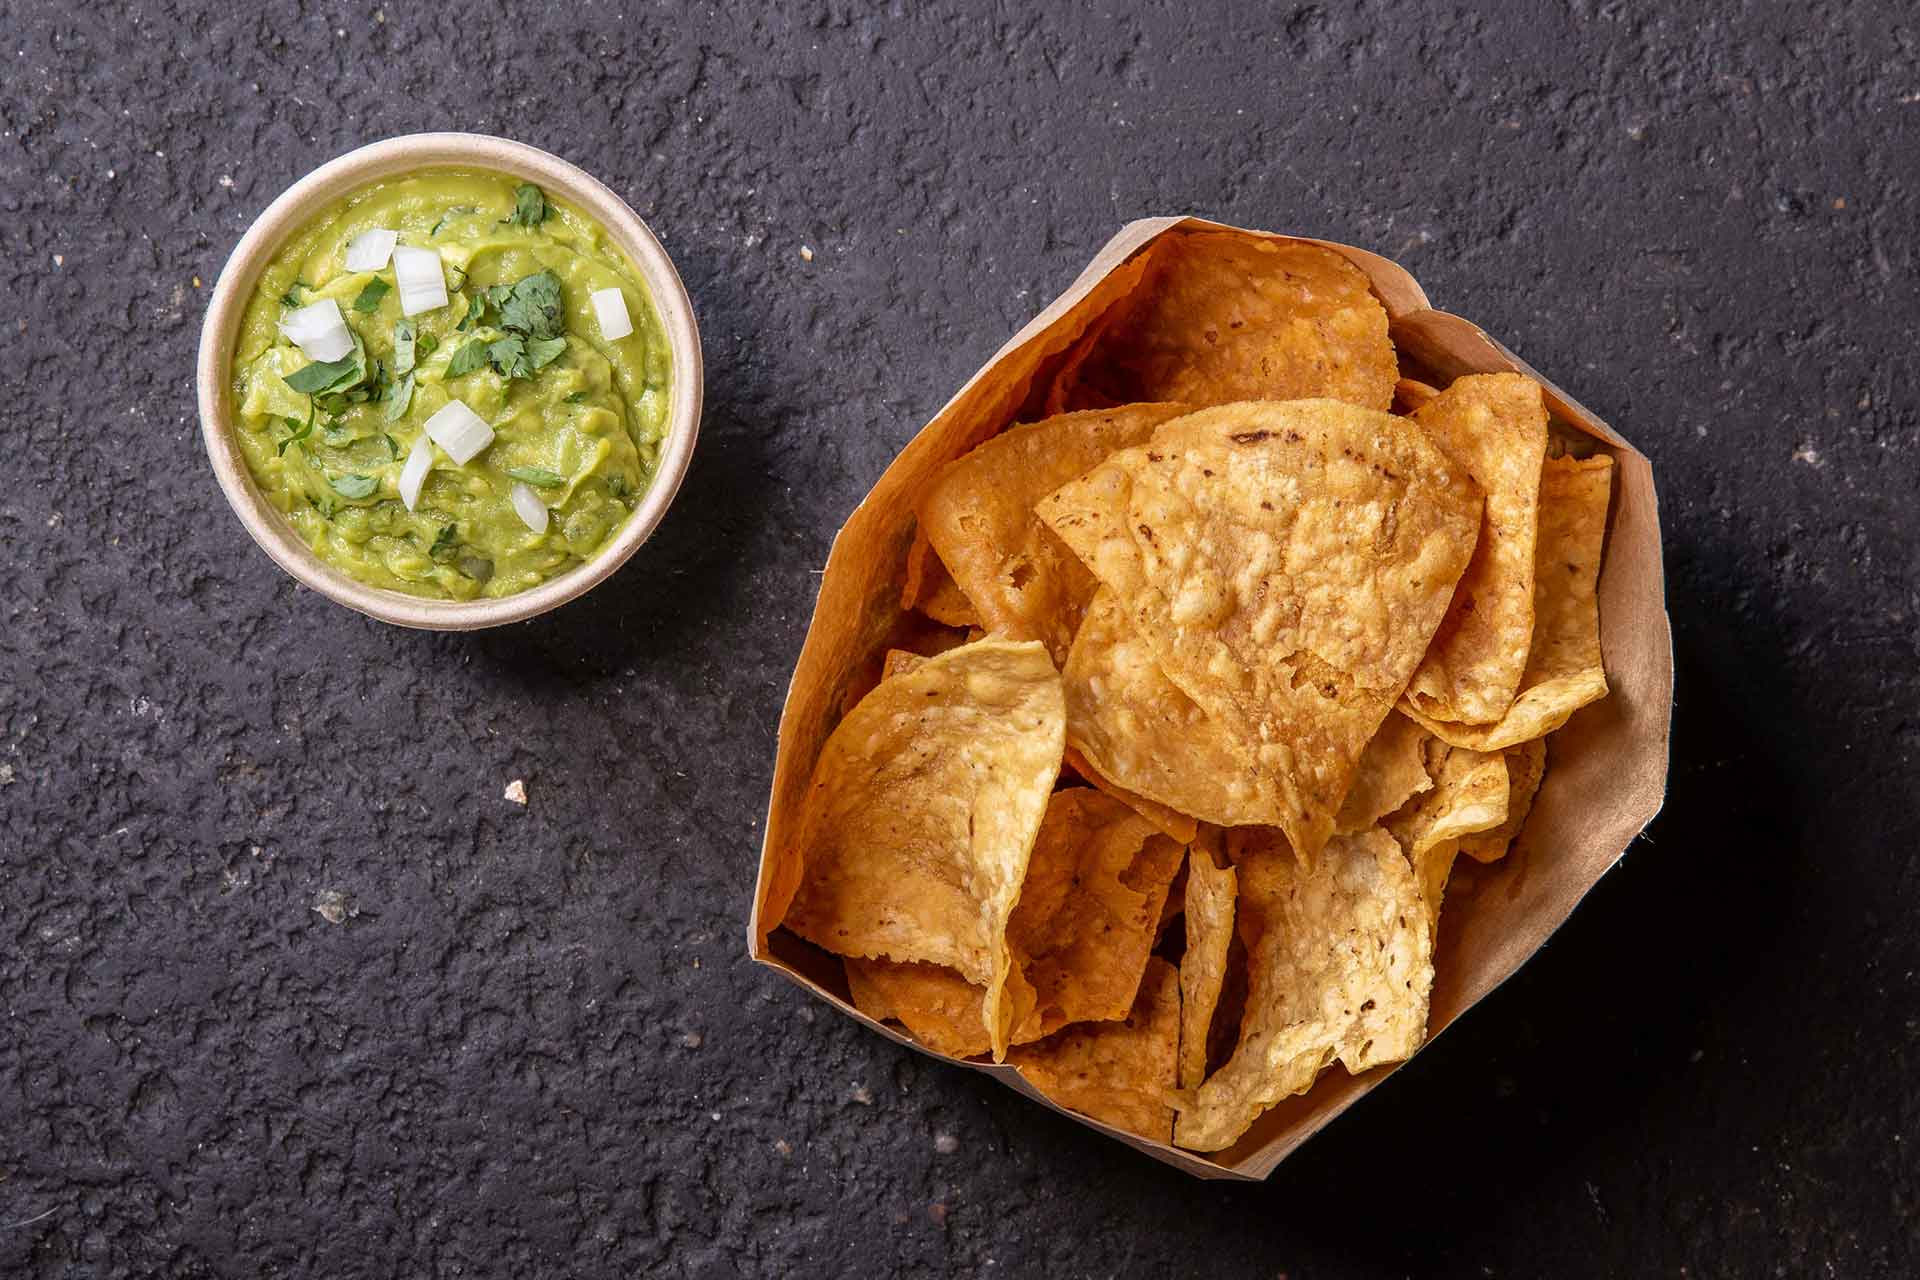 Chips and Guac - Lightly salted tortilla chips with our daily made guacamole.